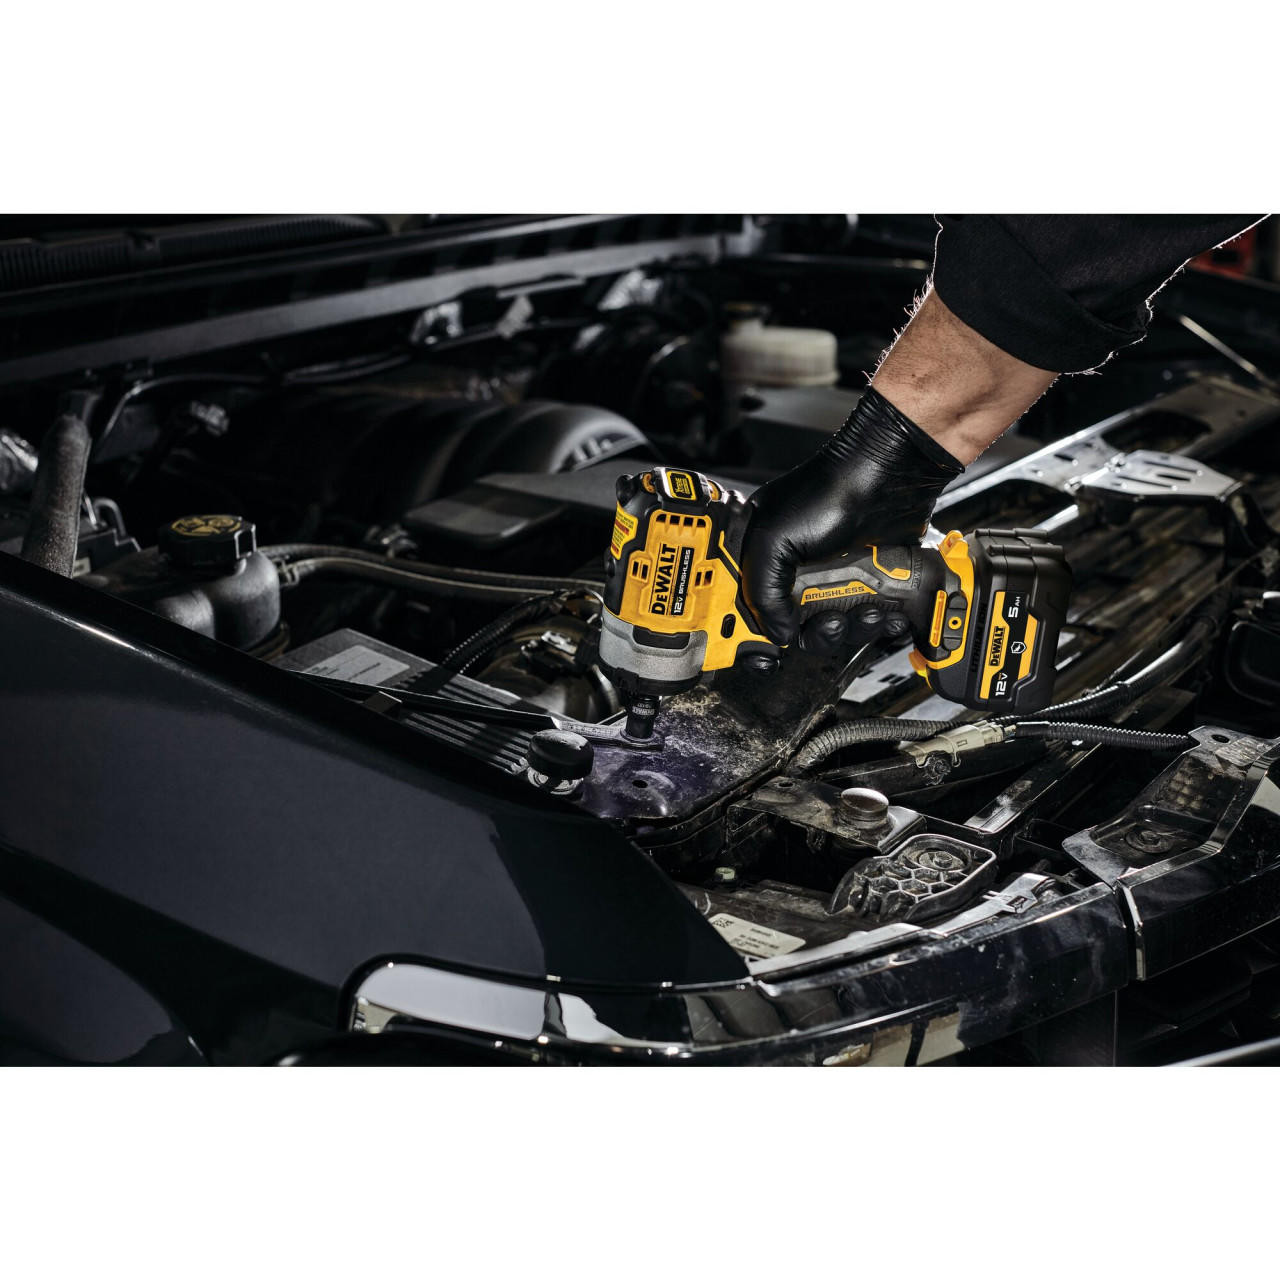 Dewalt DEWALT XTREME 12V MAX Brushless 1/2 in. Cordless Impact Wrench(Tool Only) DCF901B 